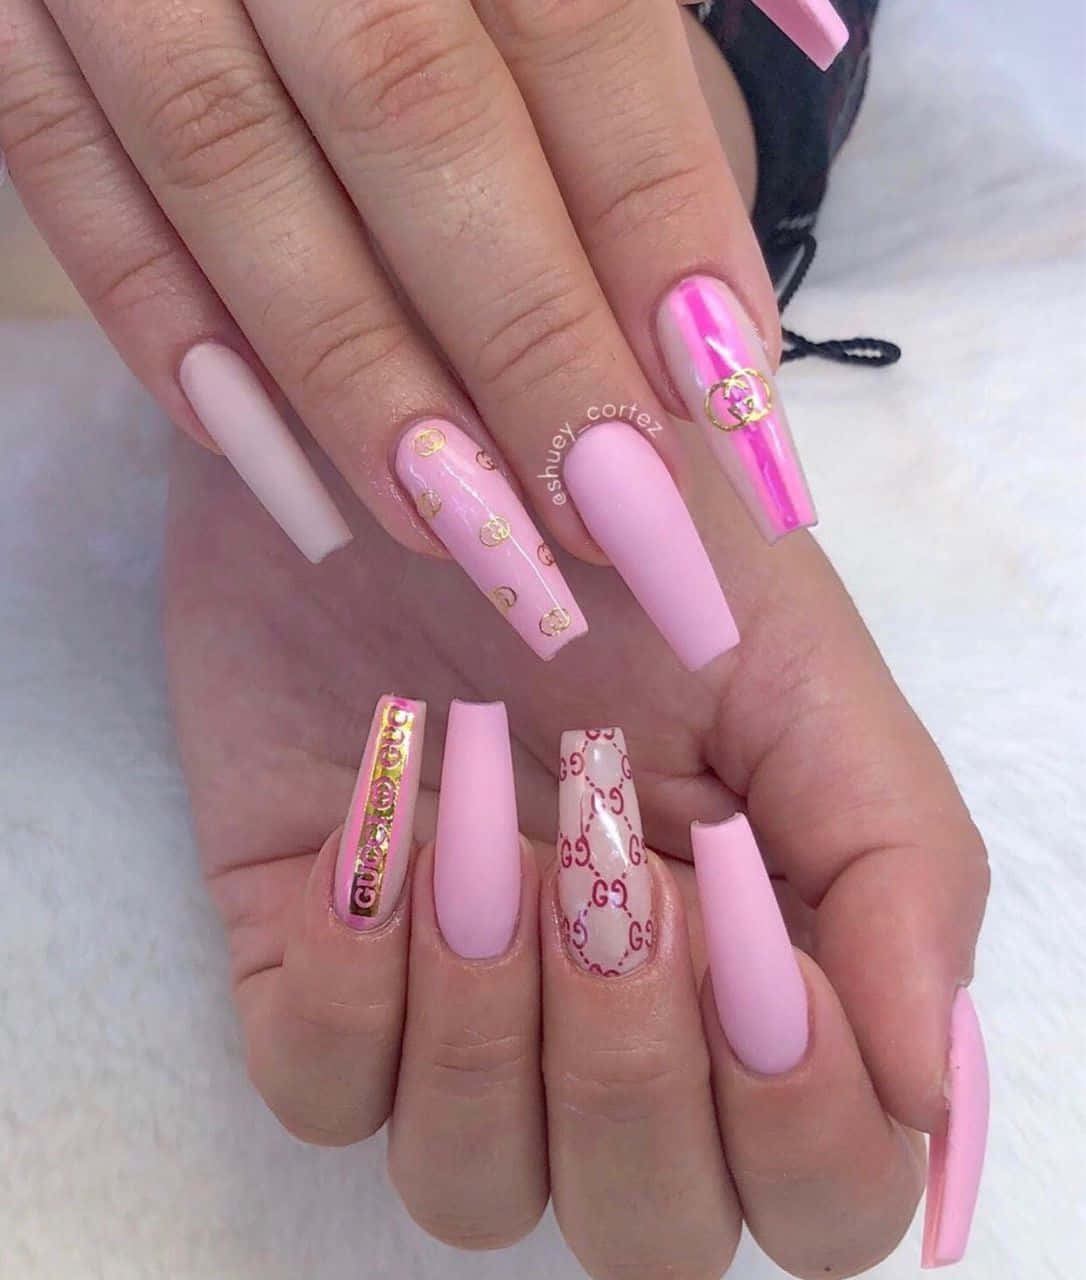 Chic Pink Nails on Granite Surface Wallpaper